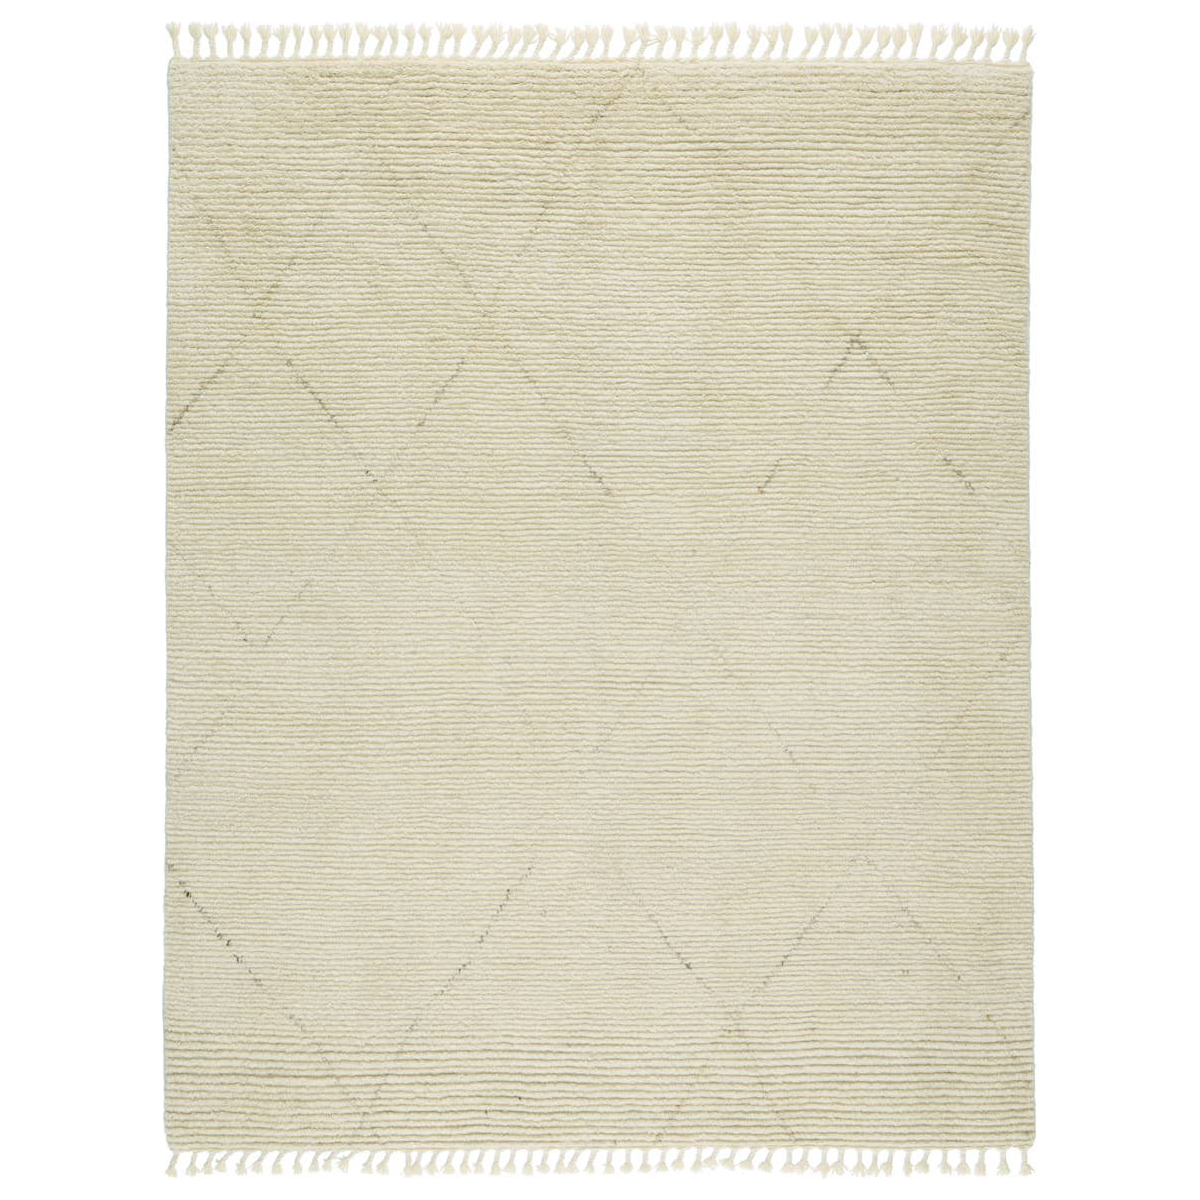 Inspired by textiles from the Tullu region in Morocco, the Alpine Manesa ALP04 rug from Jaipur Living brings texture and versatility to both global and modern spaces. Crafted of natural wool, the hand-knotted Alpine Manesa rug features a plush, ridged feel and an erased, asymmetrical trellis design in cream and dark brown tones. Amethyst Home provides interior design, new construction, custom furniture, and rugs for the Kansas City metro area.